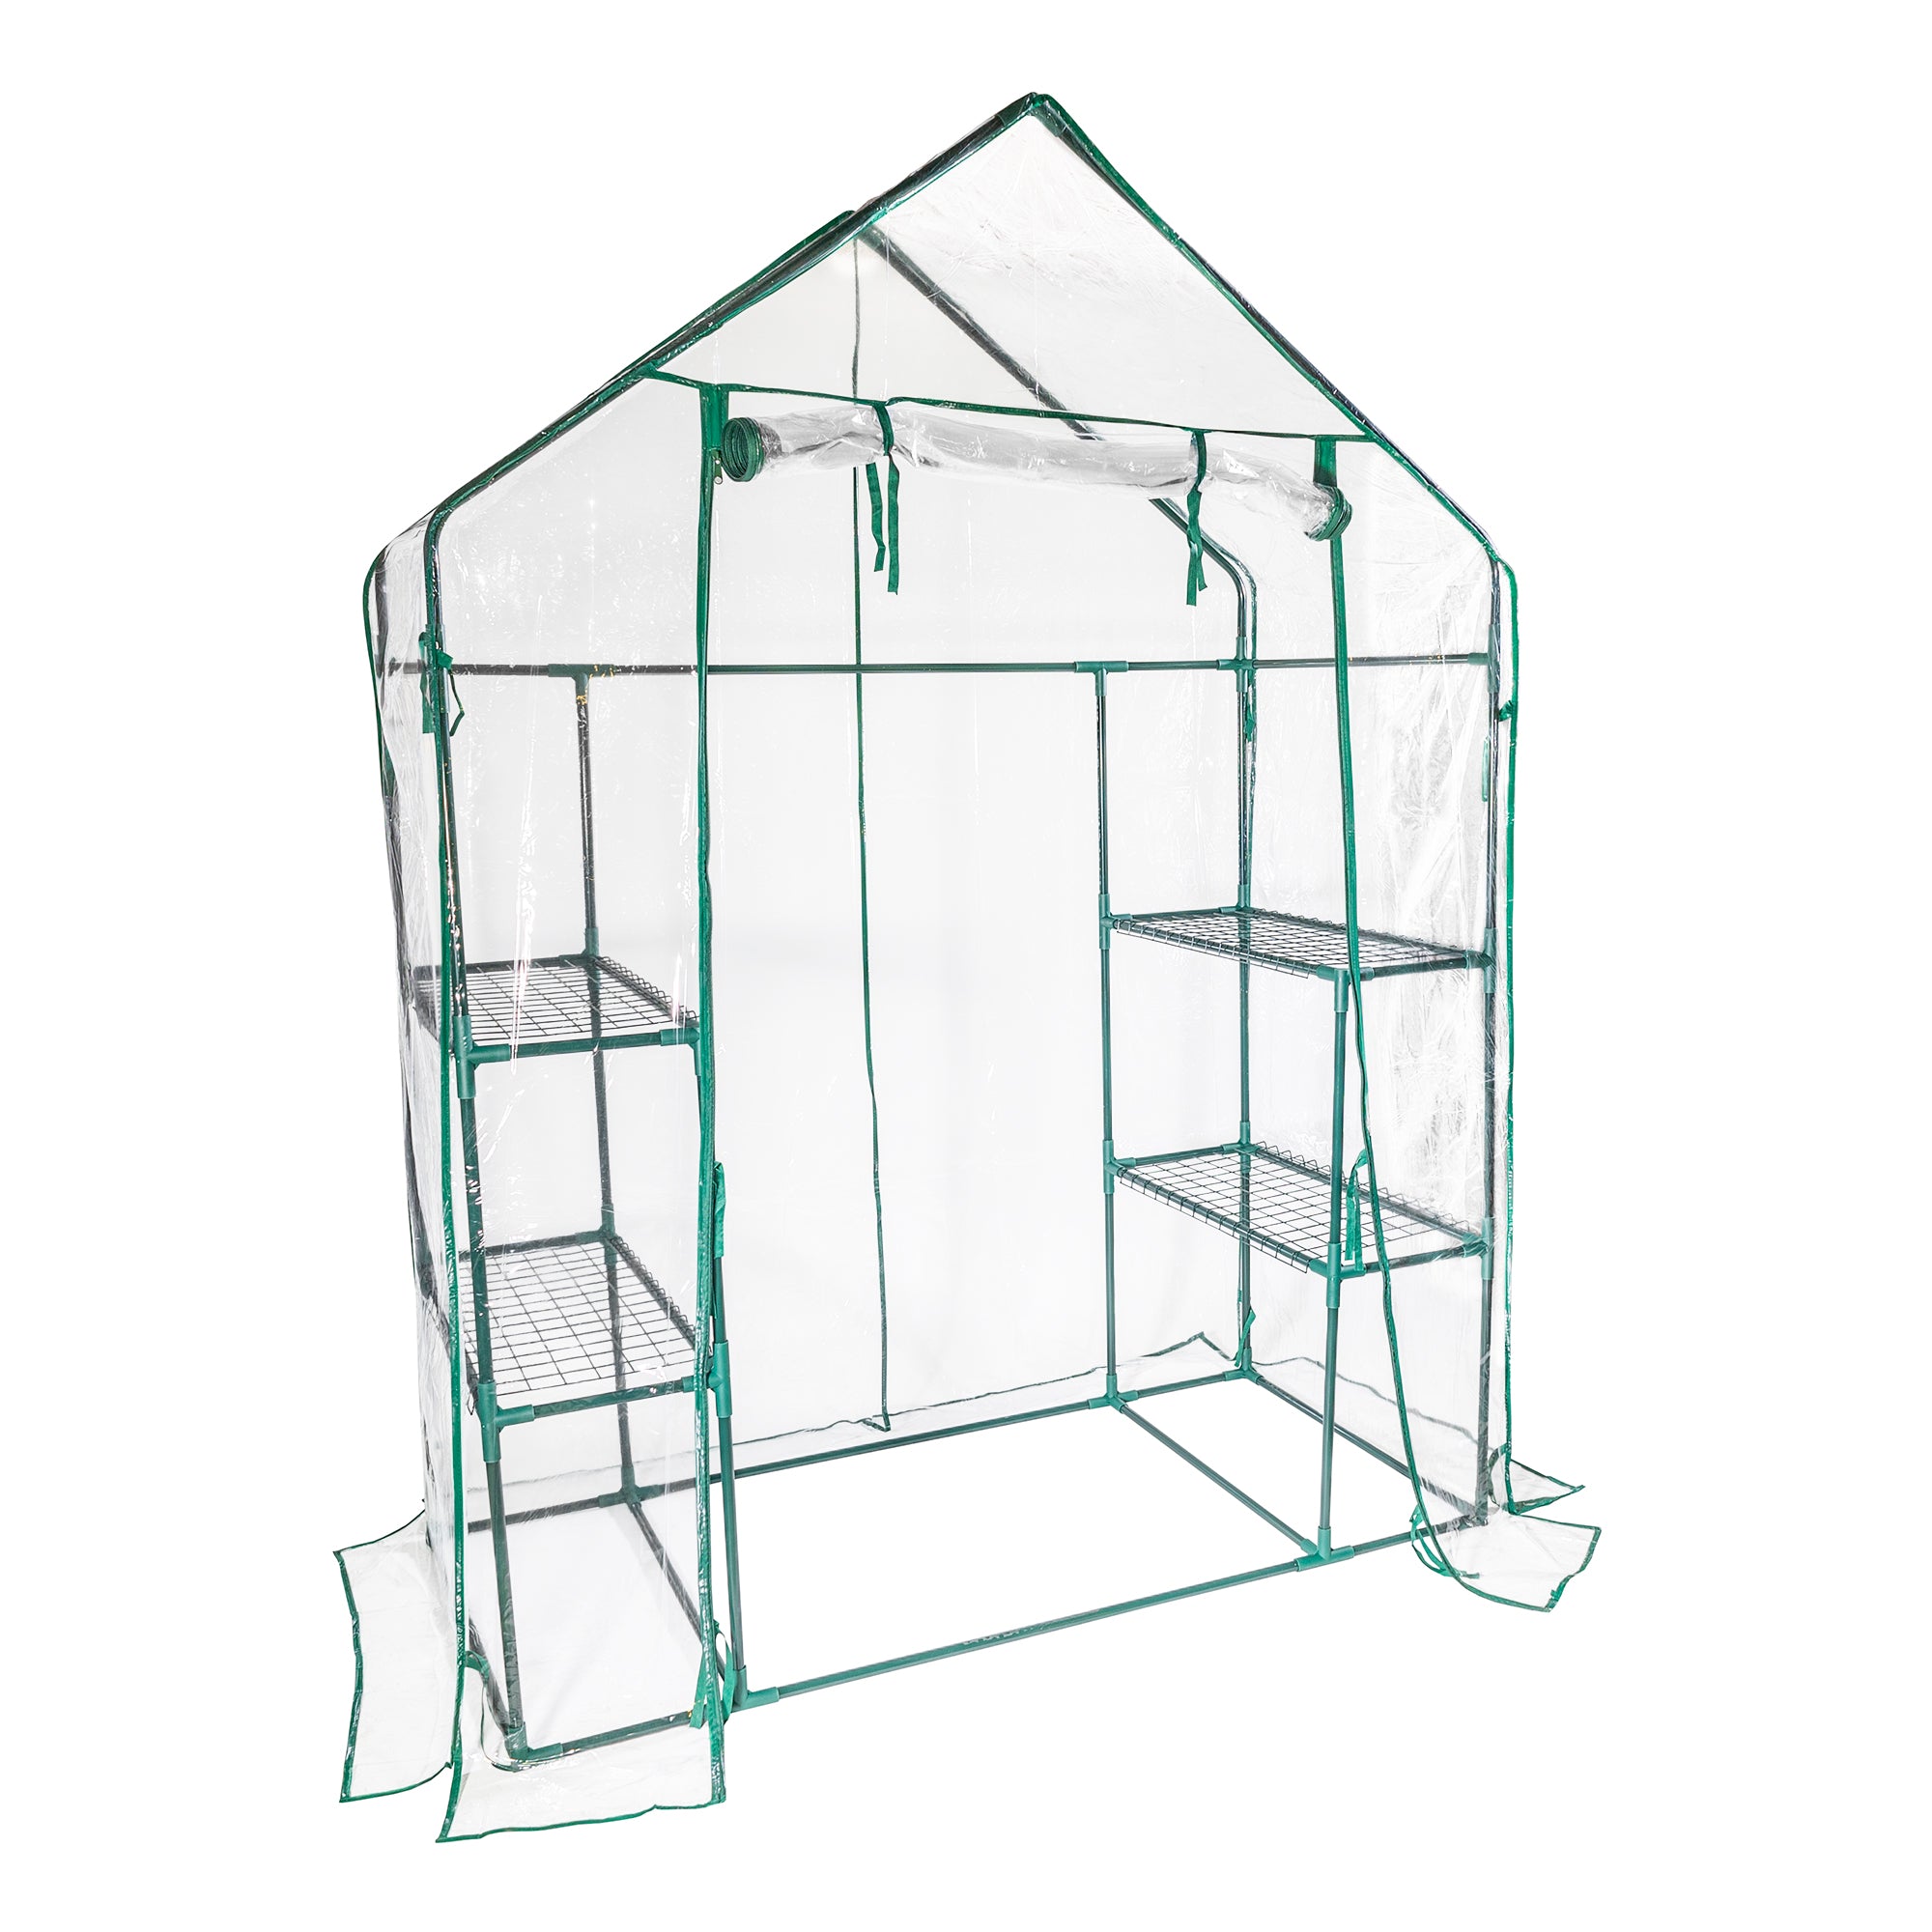 Garden Elements Personal Plastic Indoor/Outdoor Standing Greenhouse For Seed Starting and Propagation, Frost Protection, Clear, Medium, 56" x 29" x 77"